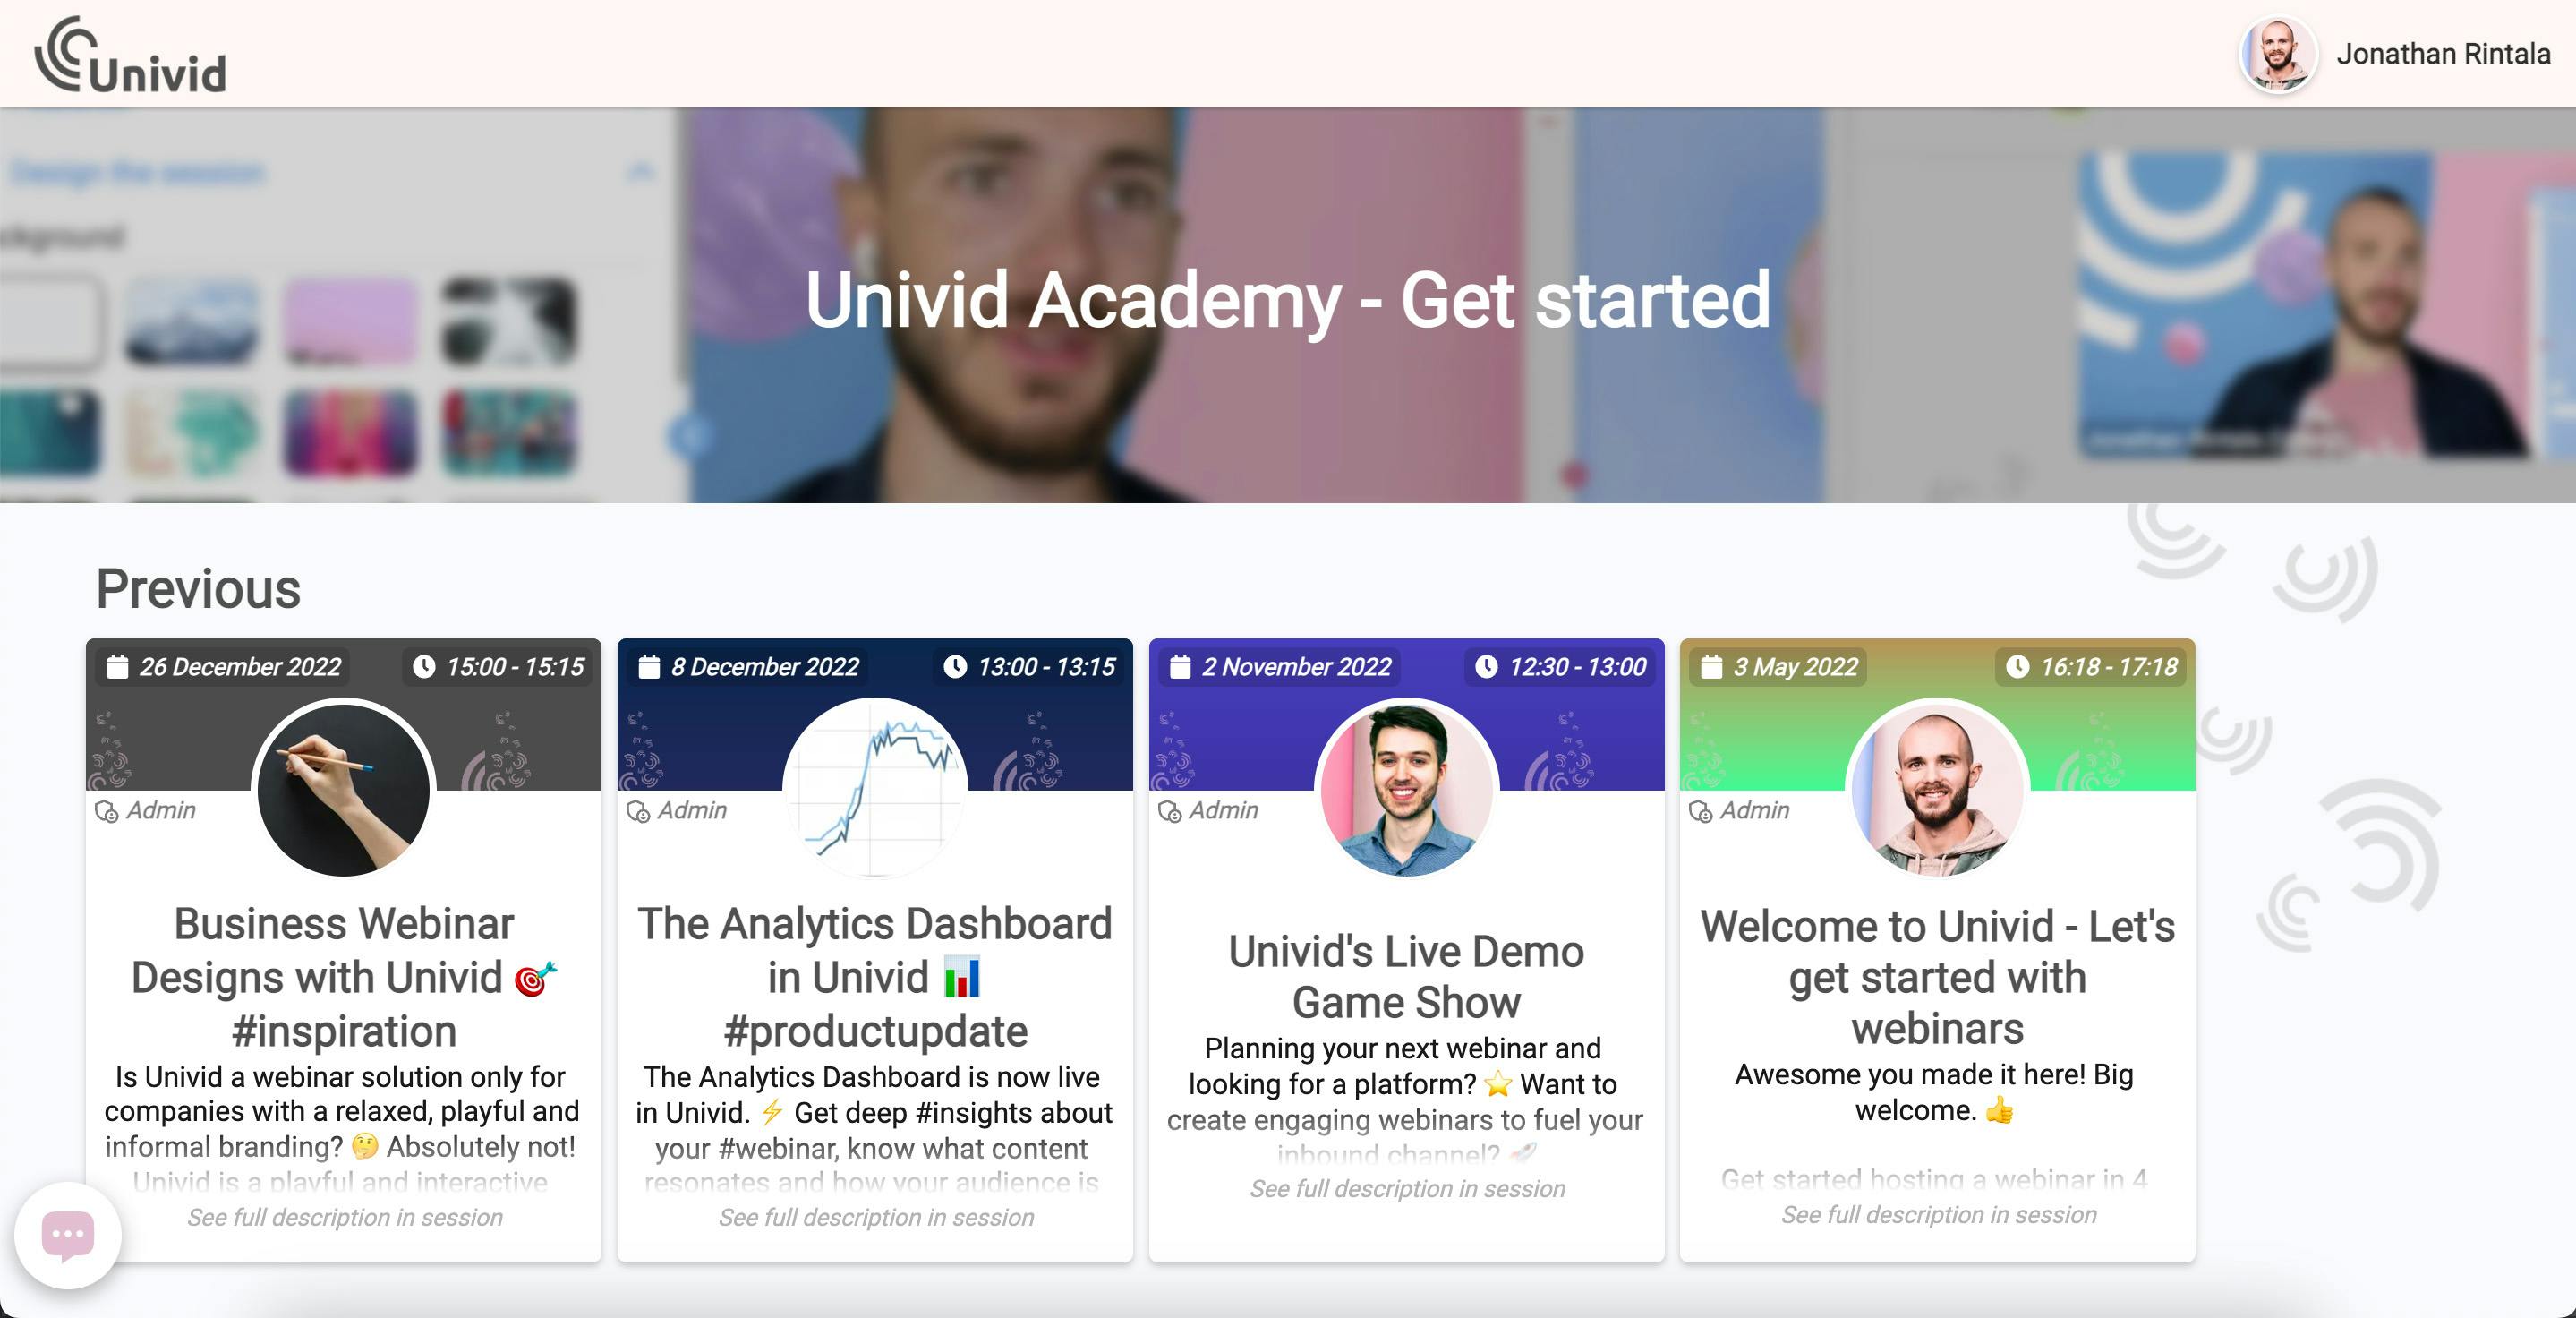 The Univid Academy - Collection of on-demand